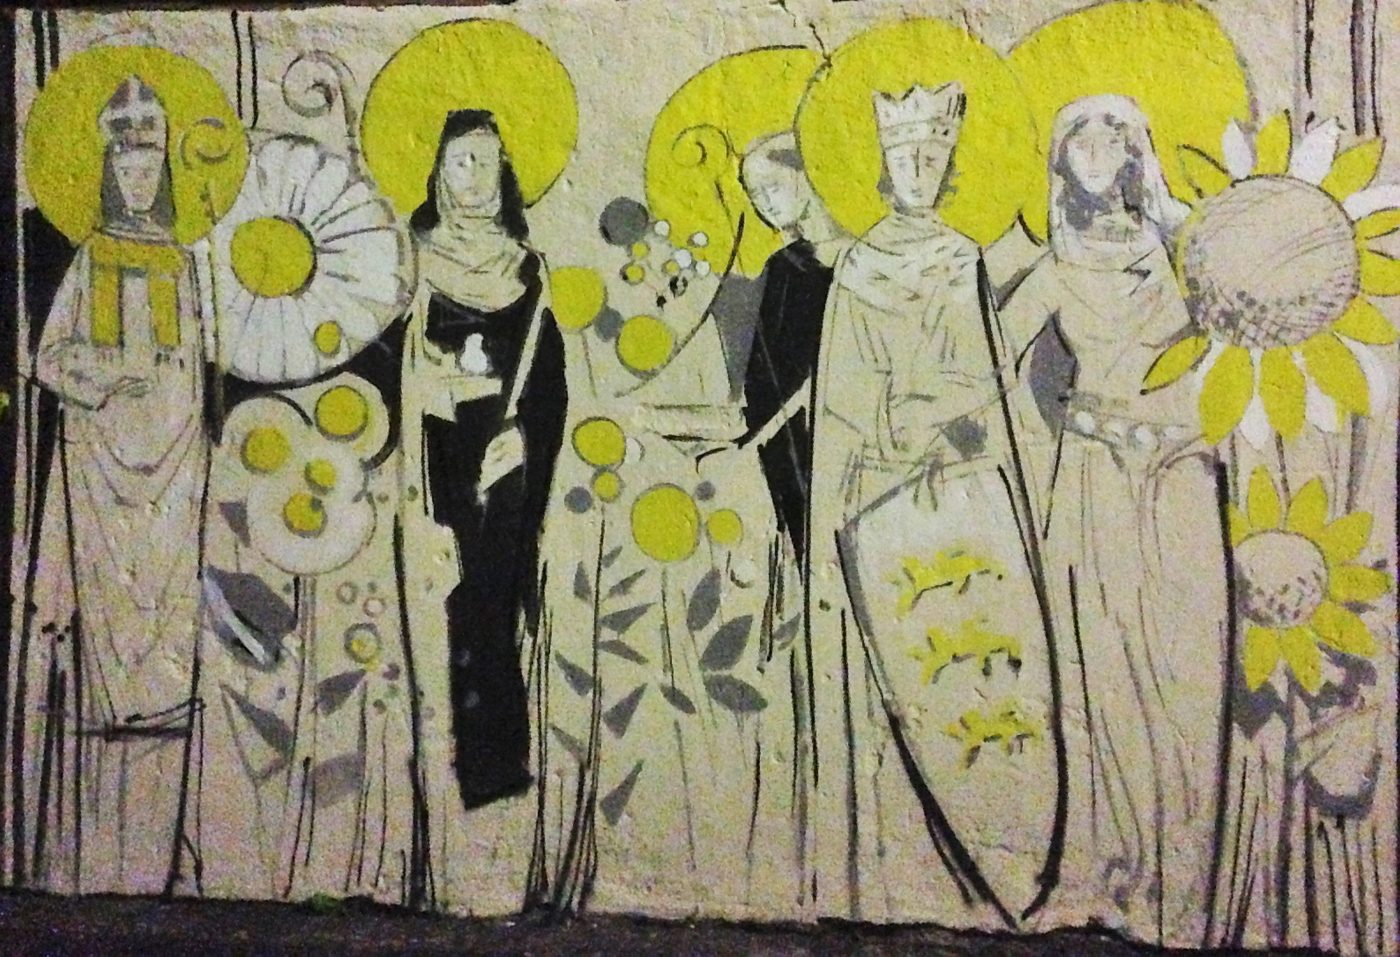 Graffiti of the family of saints from wiki commons